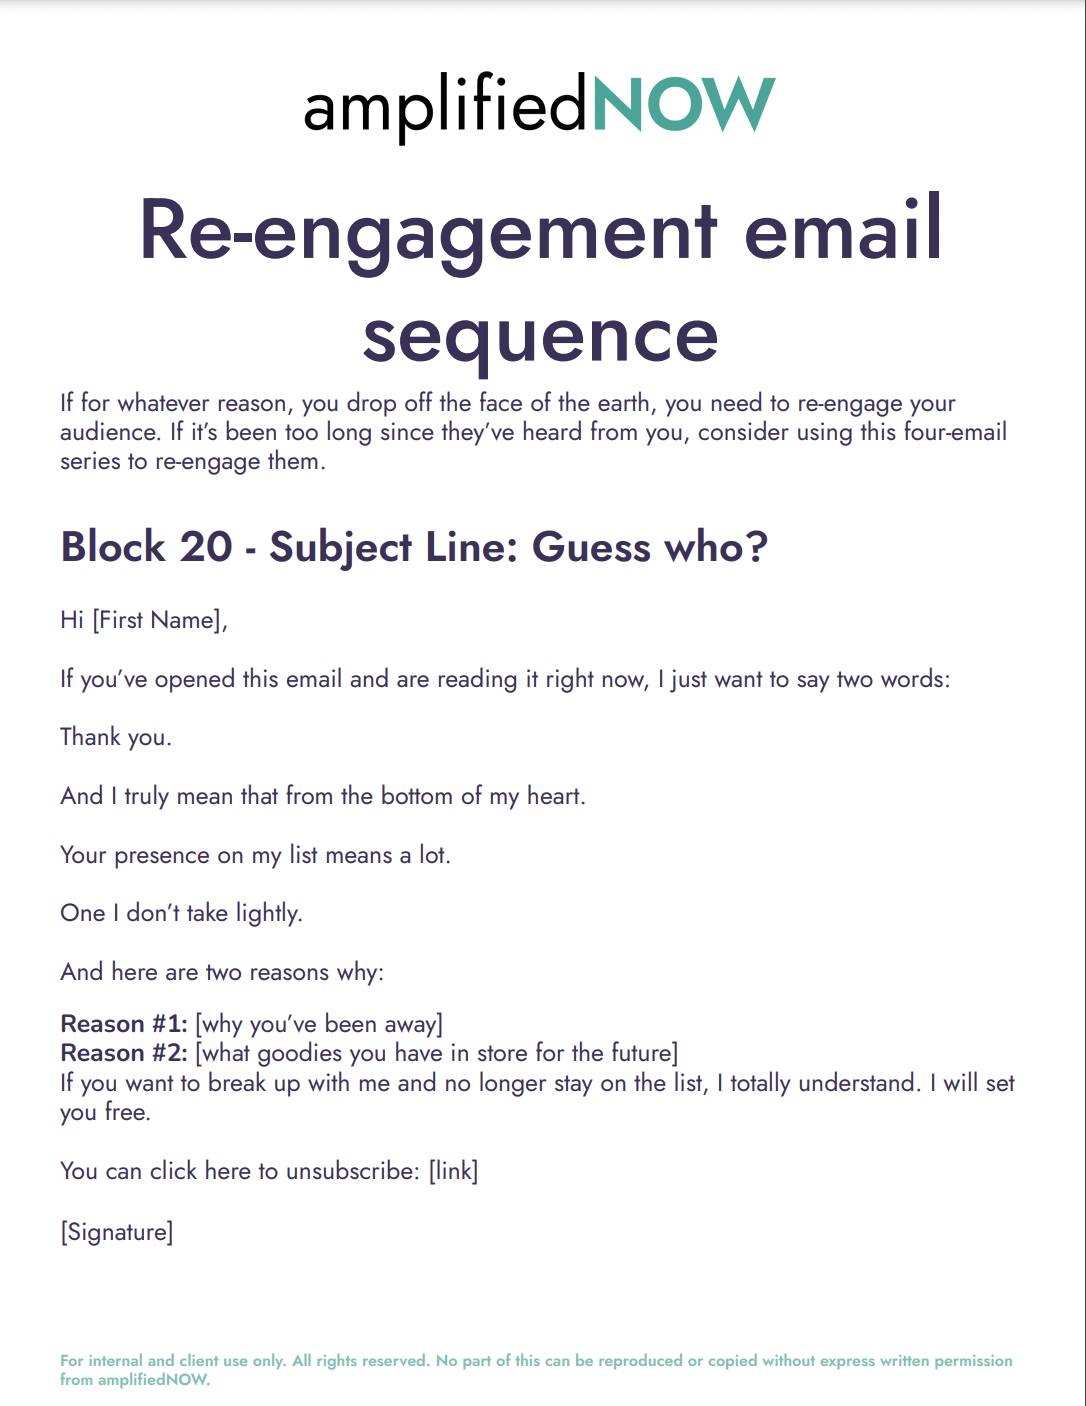 Re-engagment Email Sequence